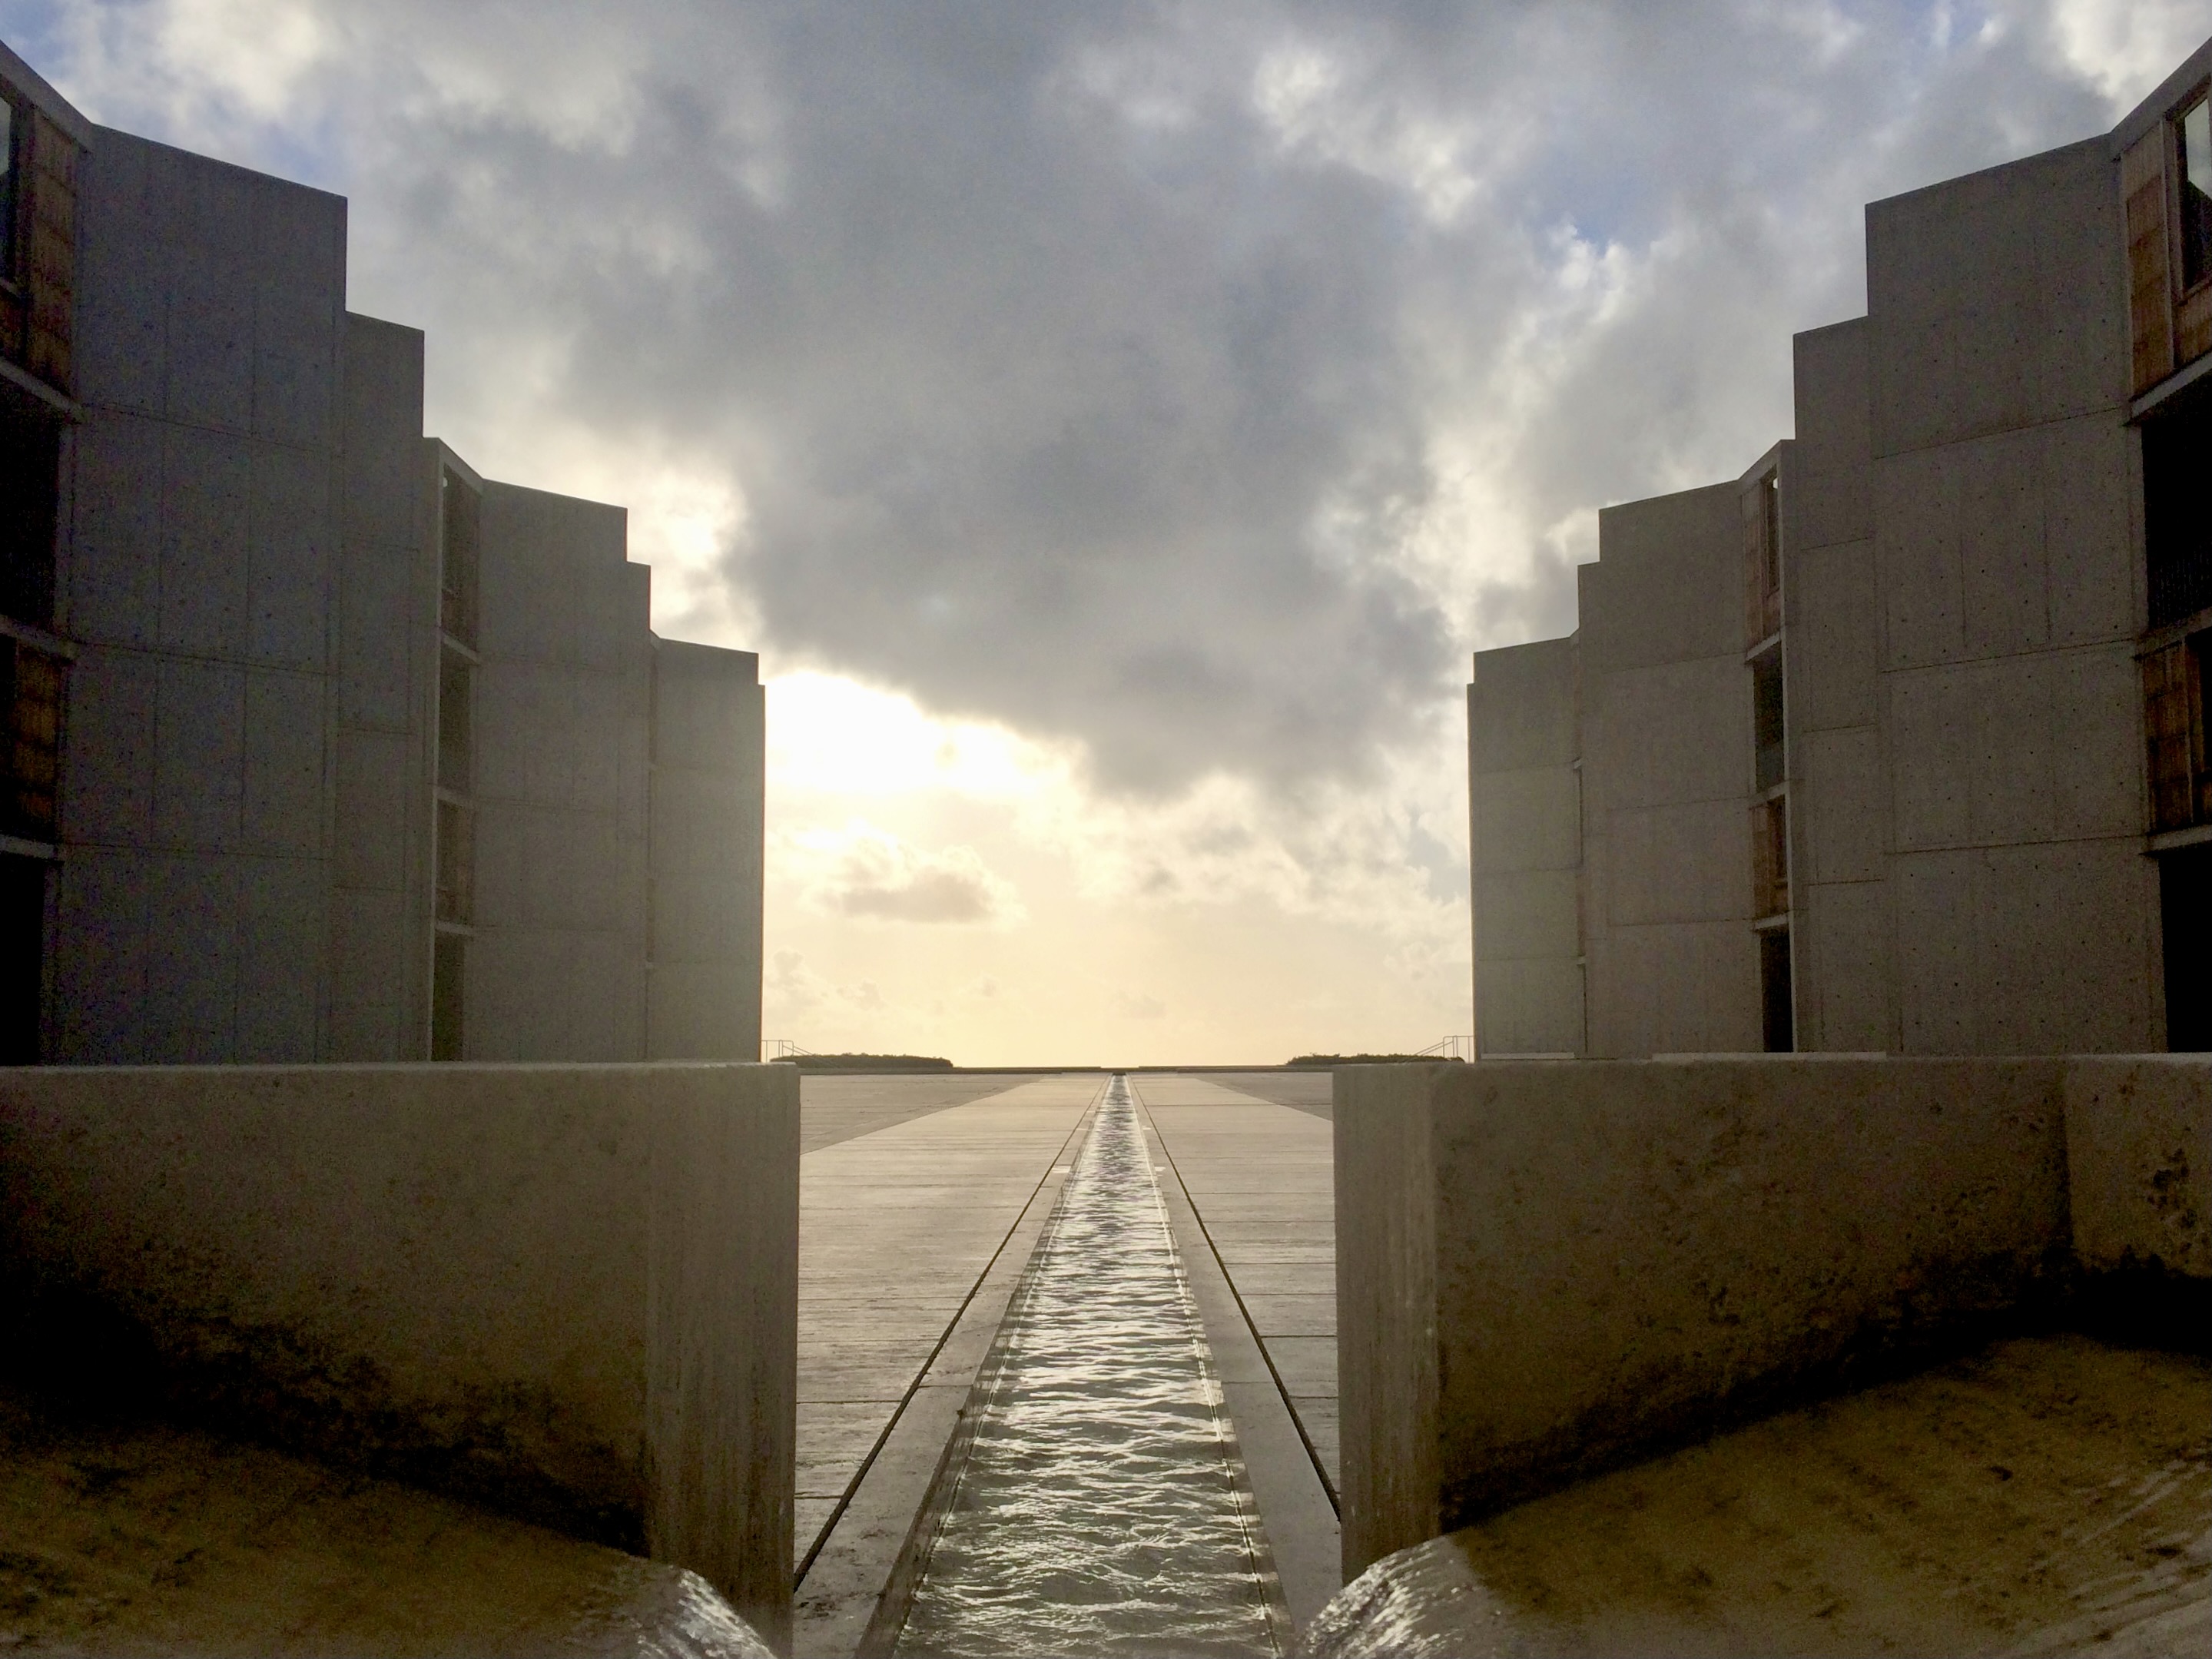 The Salk Institute in La Jolla, California, which I visited in while participating in the 2014 Information Architecture Summit.